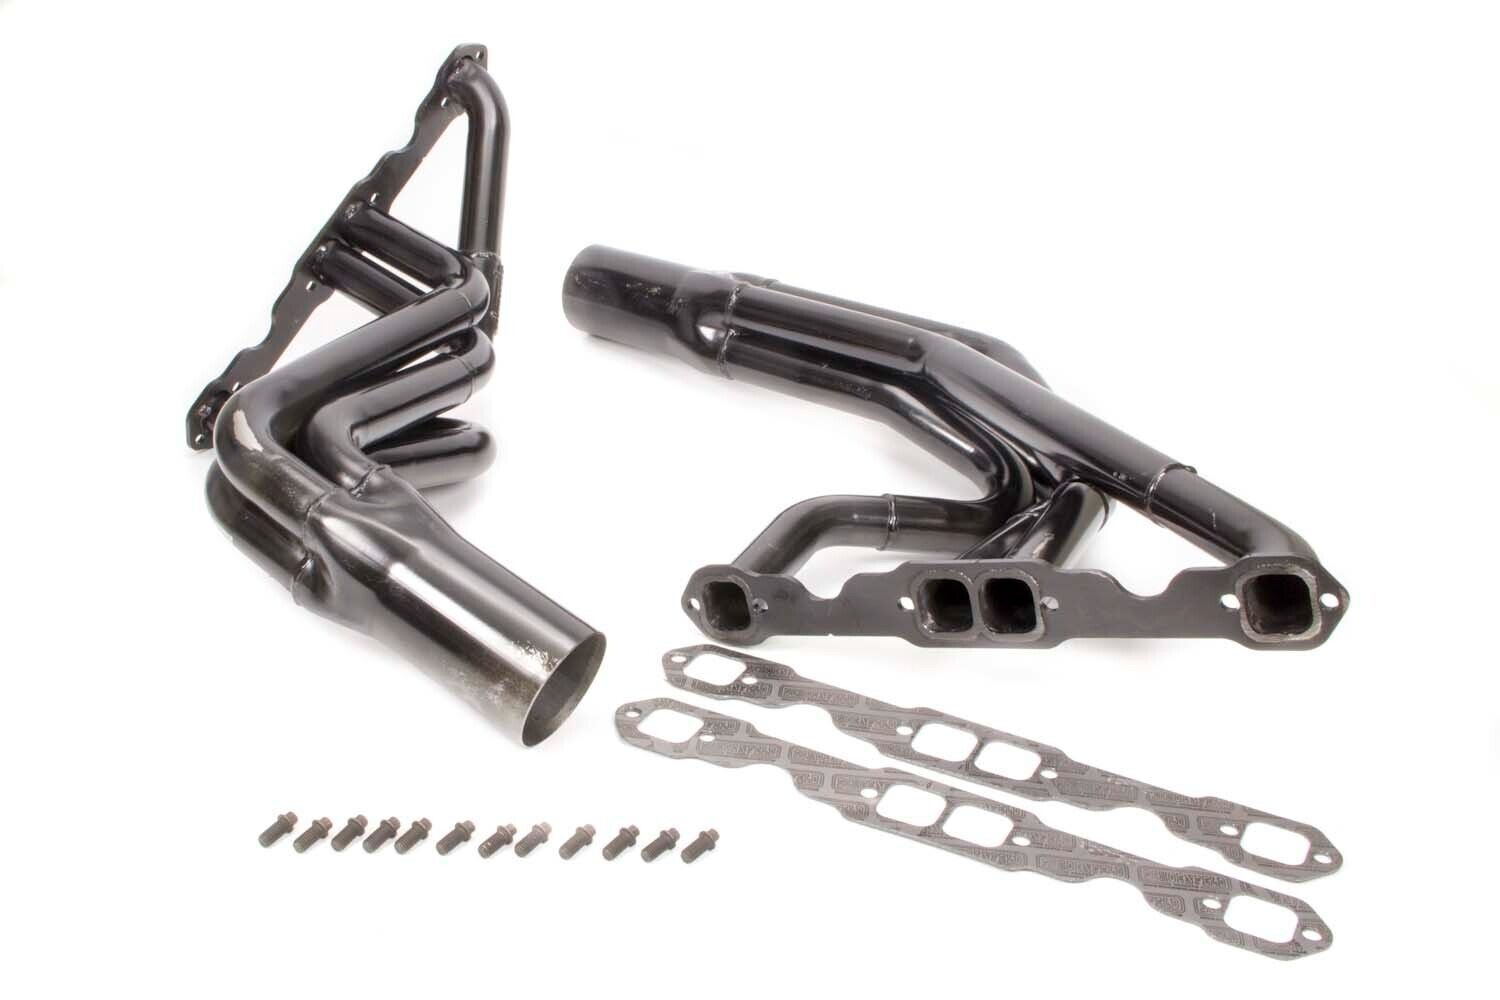 Schoenfeld 142-525LV Headers Dirt Late Model 1.75 to 1.875 for Small Block Chevy